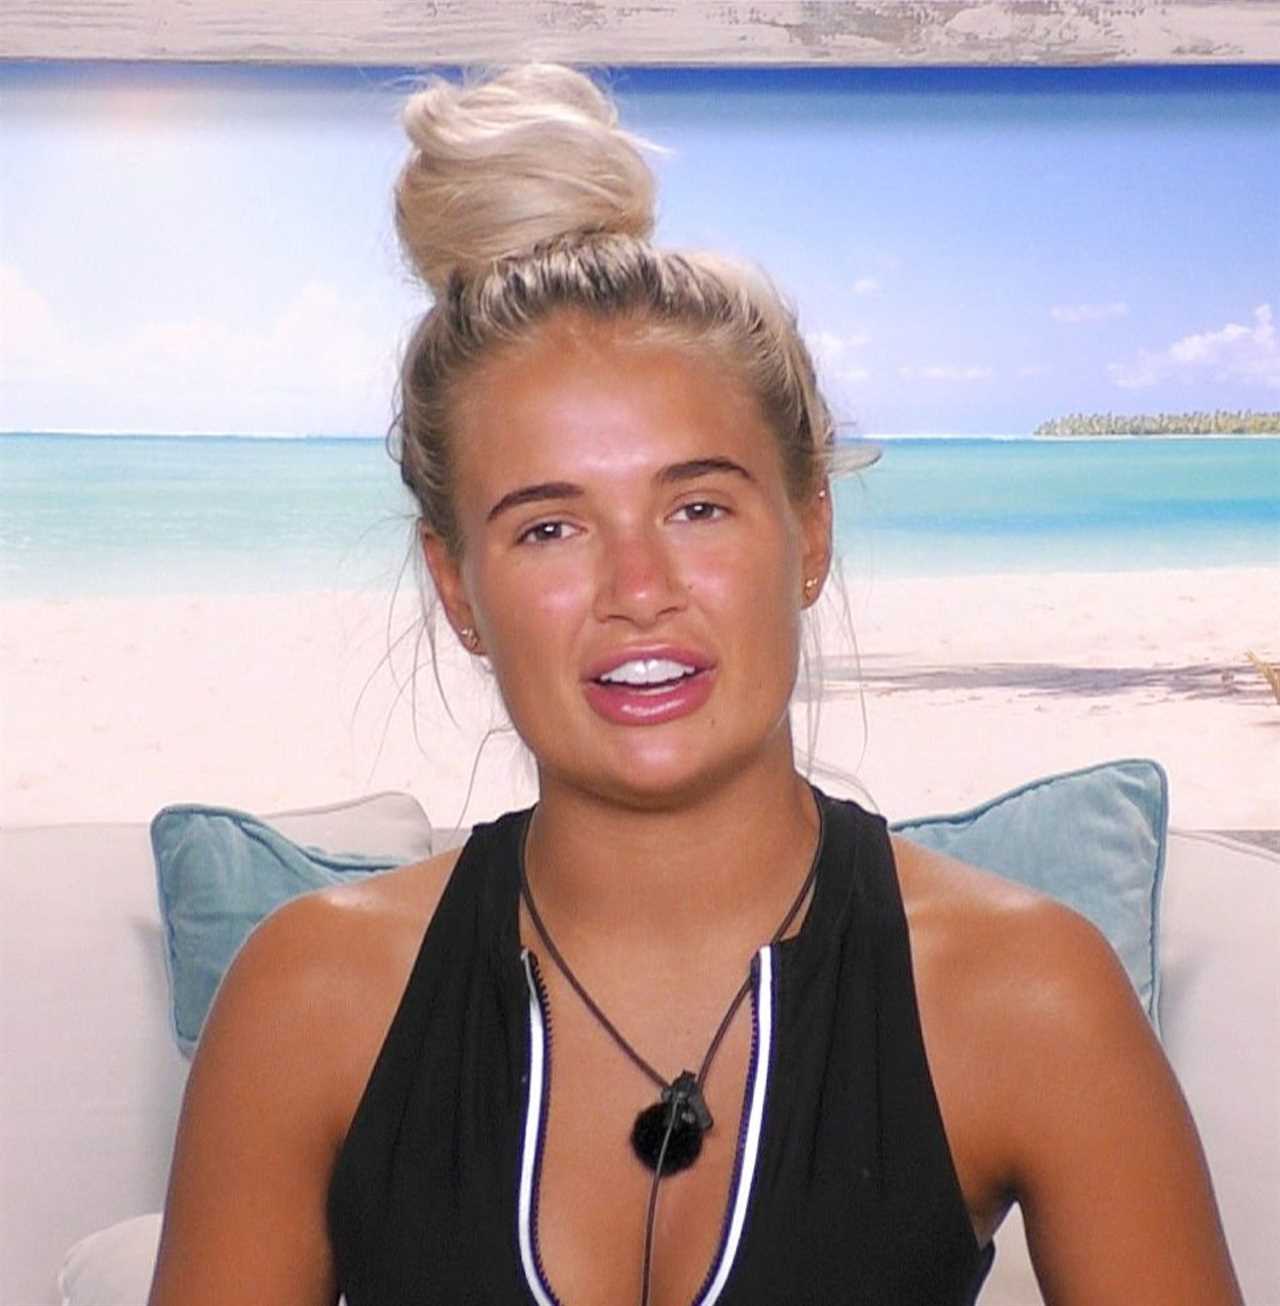 Molly-Mae finally hits back at Love Island co-stars over feud and says ‘I’m not nasty – we just weren’t friends!’